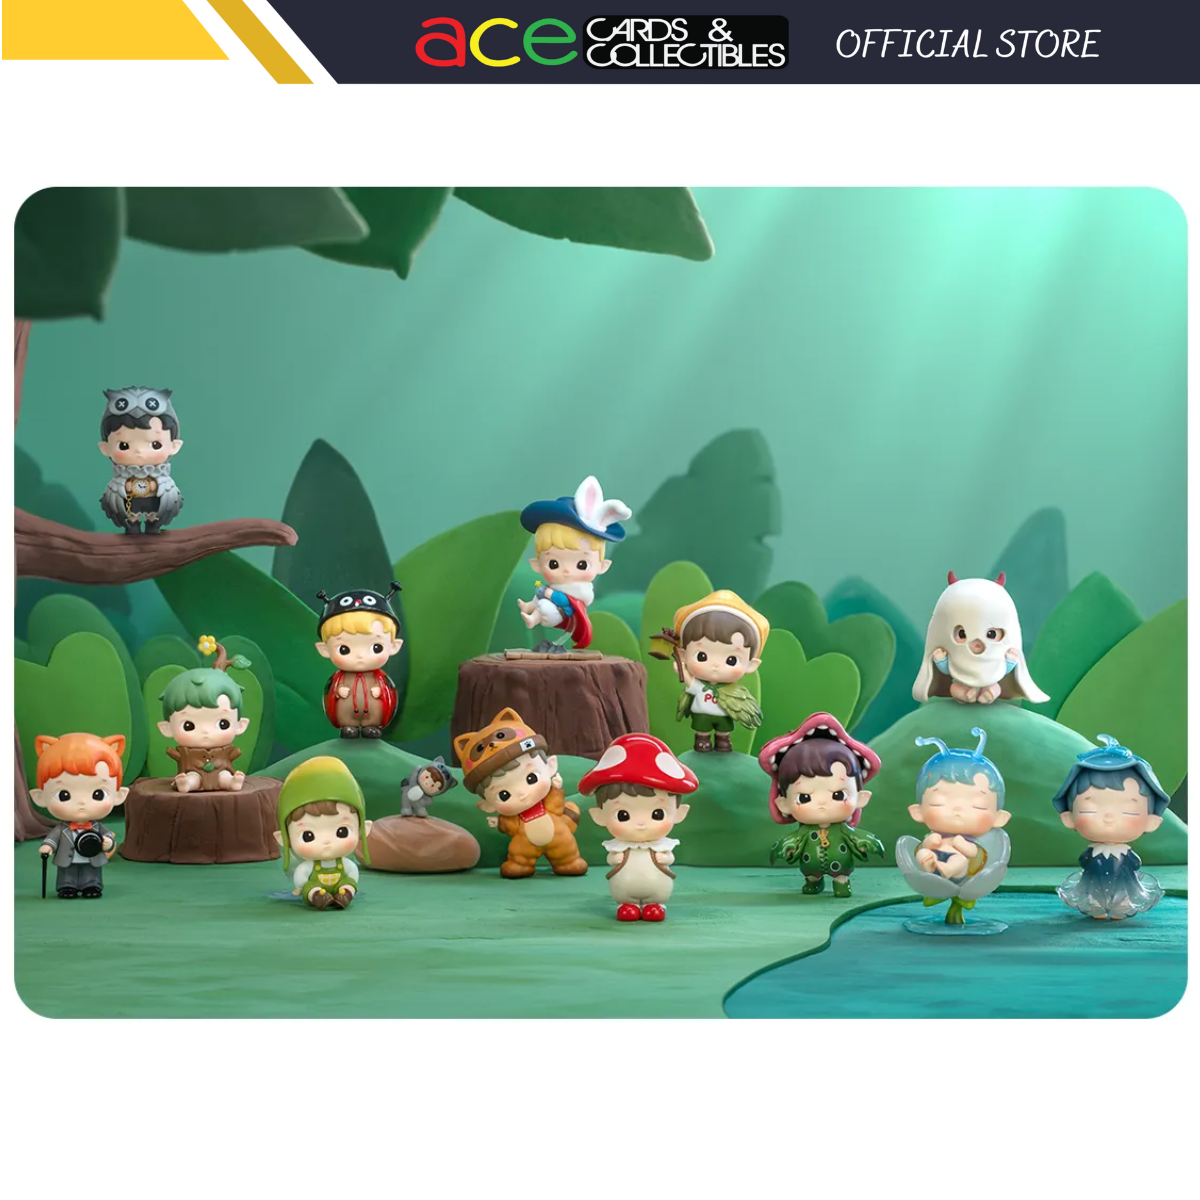 POP MART HACIPUPU The Adventures In The Woods Series-Single Box (Random)-Pop Mart-Ace Cards & Collectibles